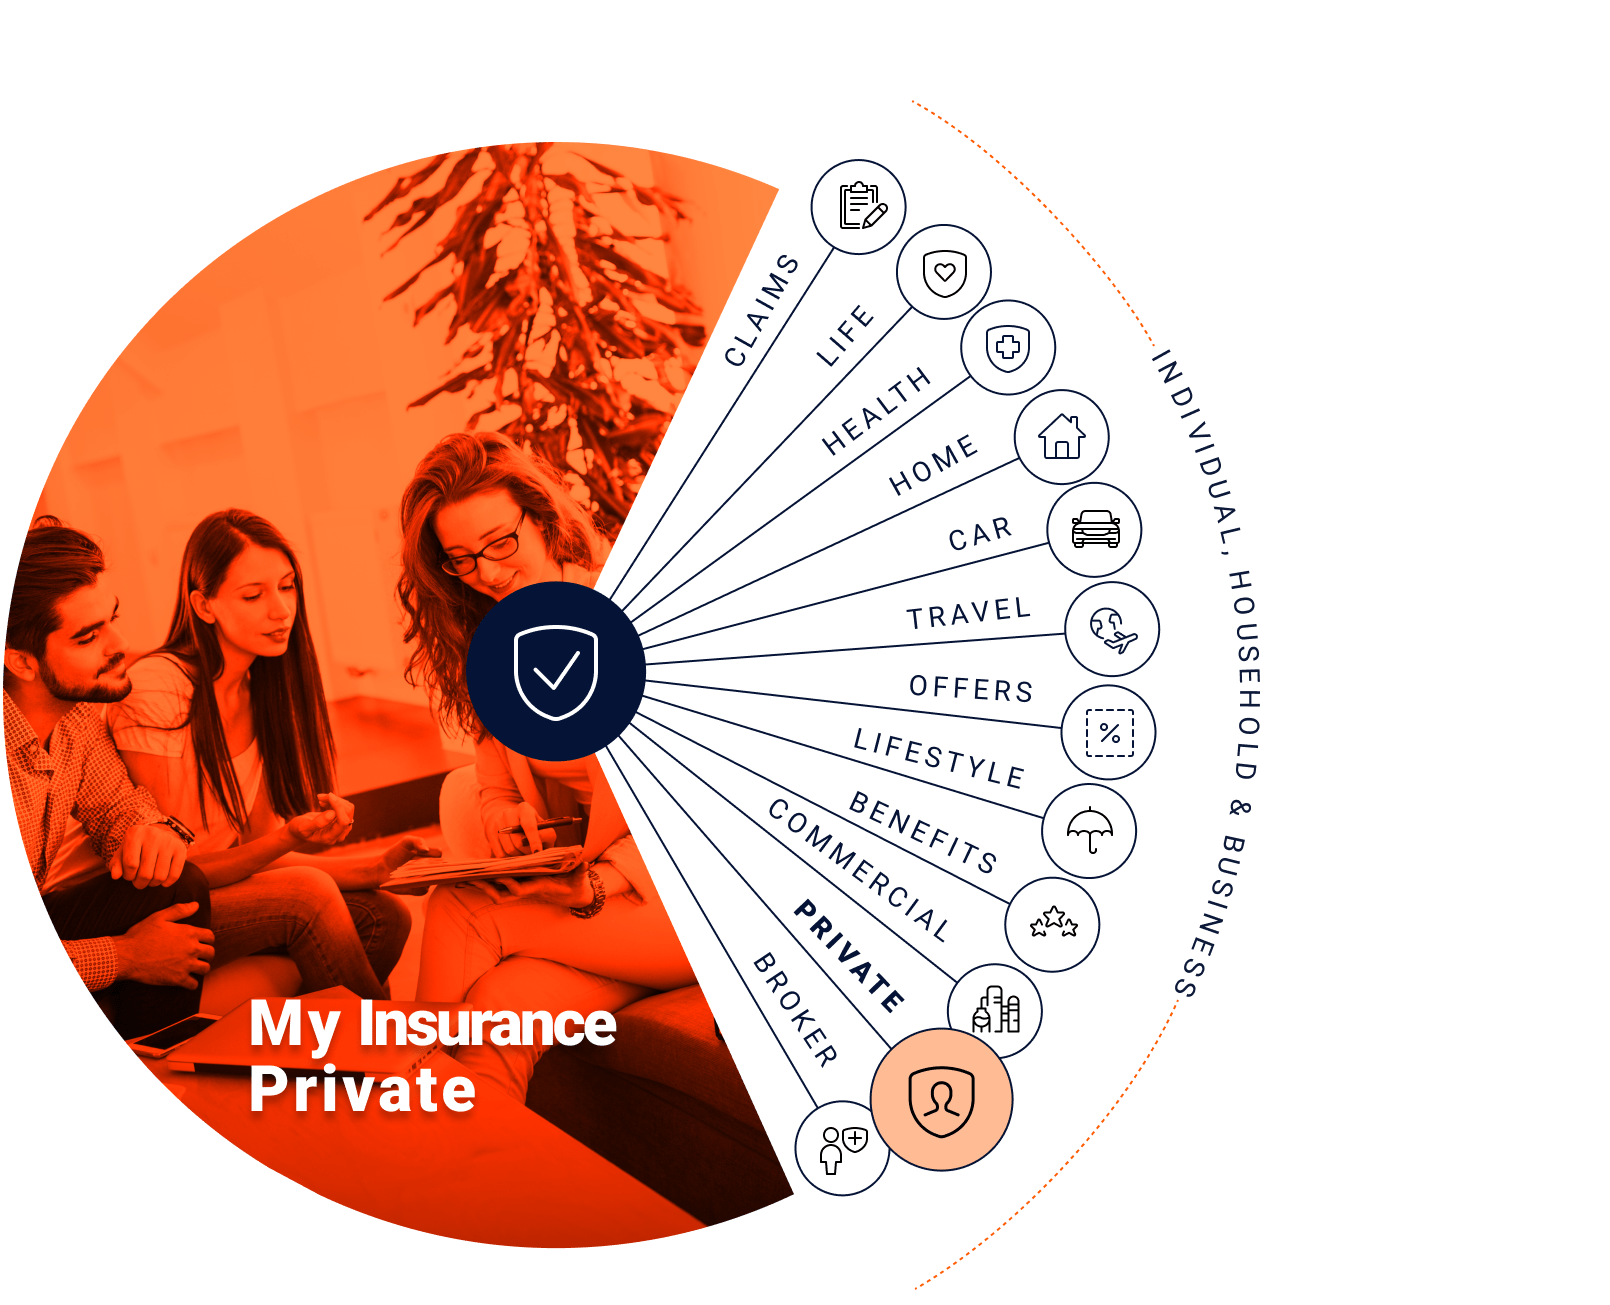 My Insurance private: Claims, Life, health, home, car, travel, offers, lifestyle, benefits, commercial, Private, and broker